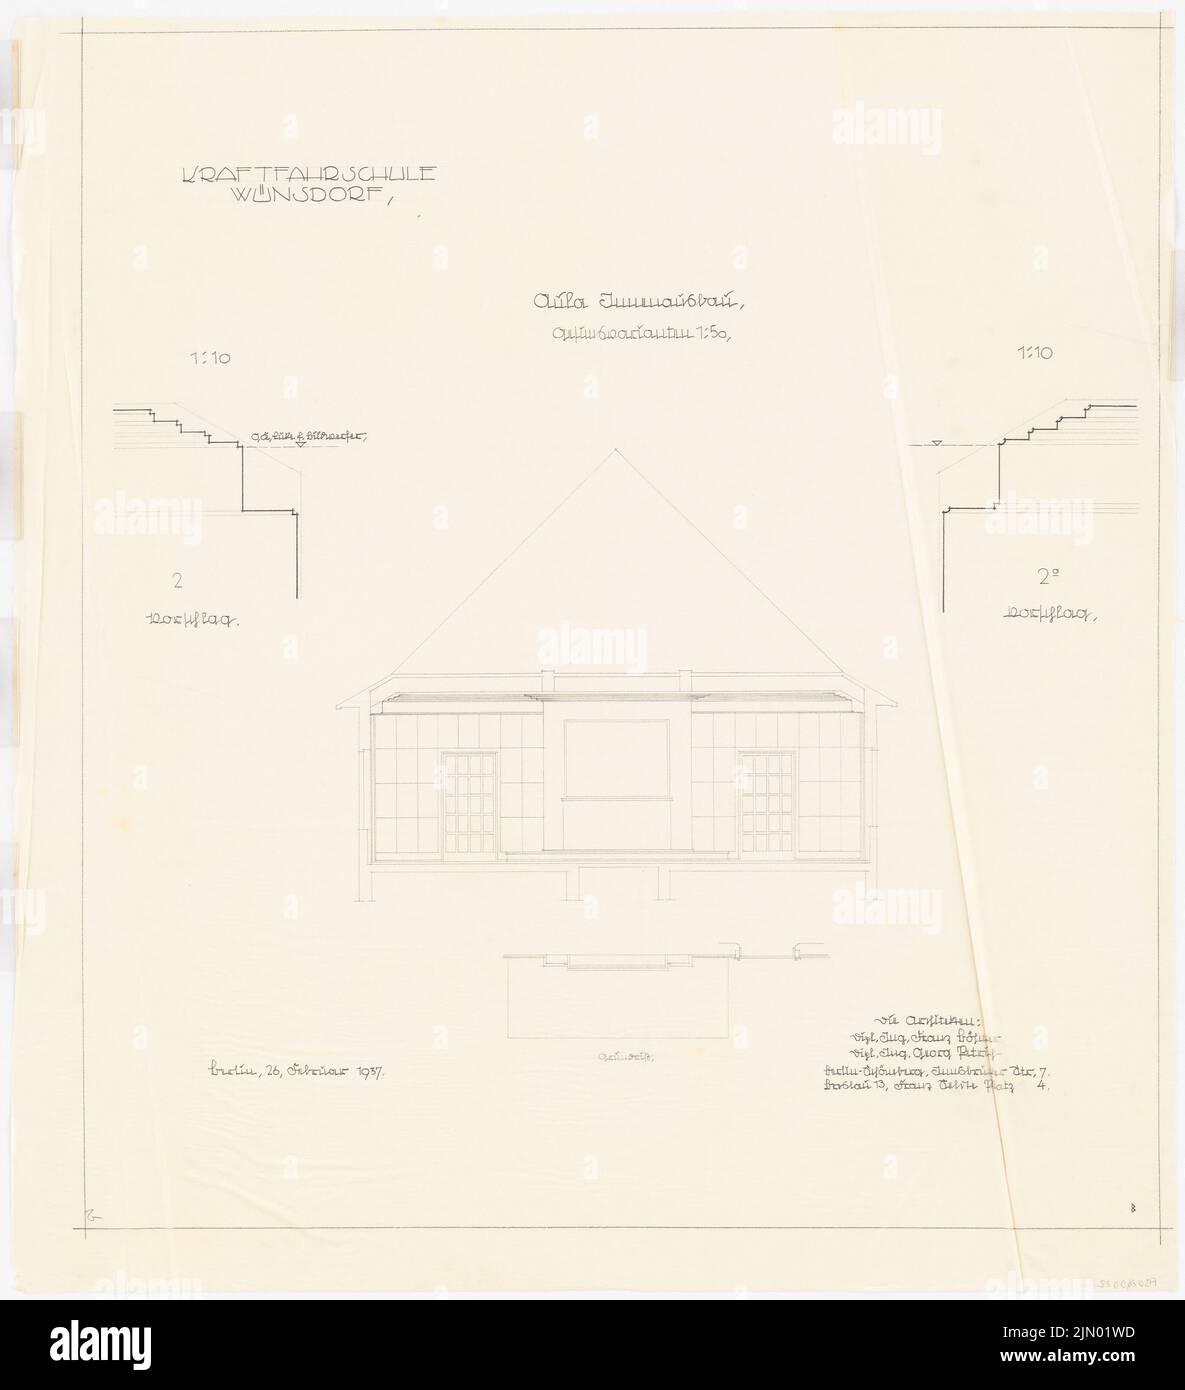 Böhmer Franz (1907-1943), motor vehicle in Wünsdorf (February 26, 1937): Auda: wall view, floor plan 1:50, cuts 1:10. Pencil on transparent, 82.5 x 75.2 cm (including scan edges) Stock Photo